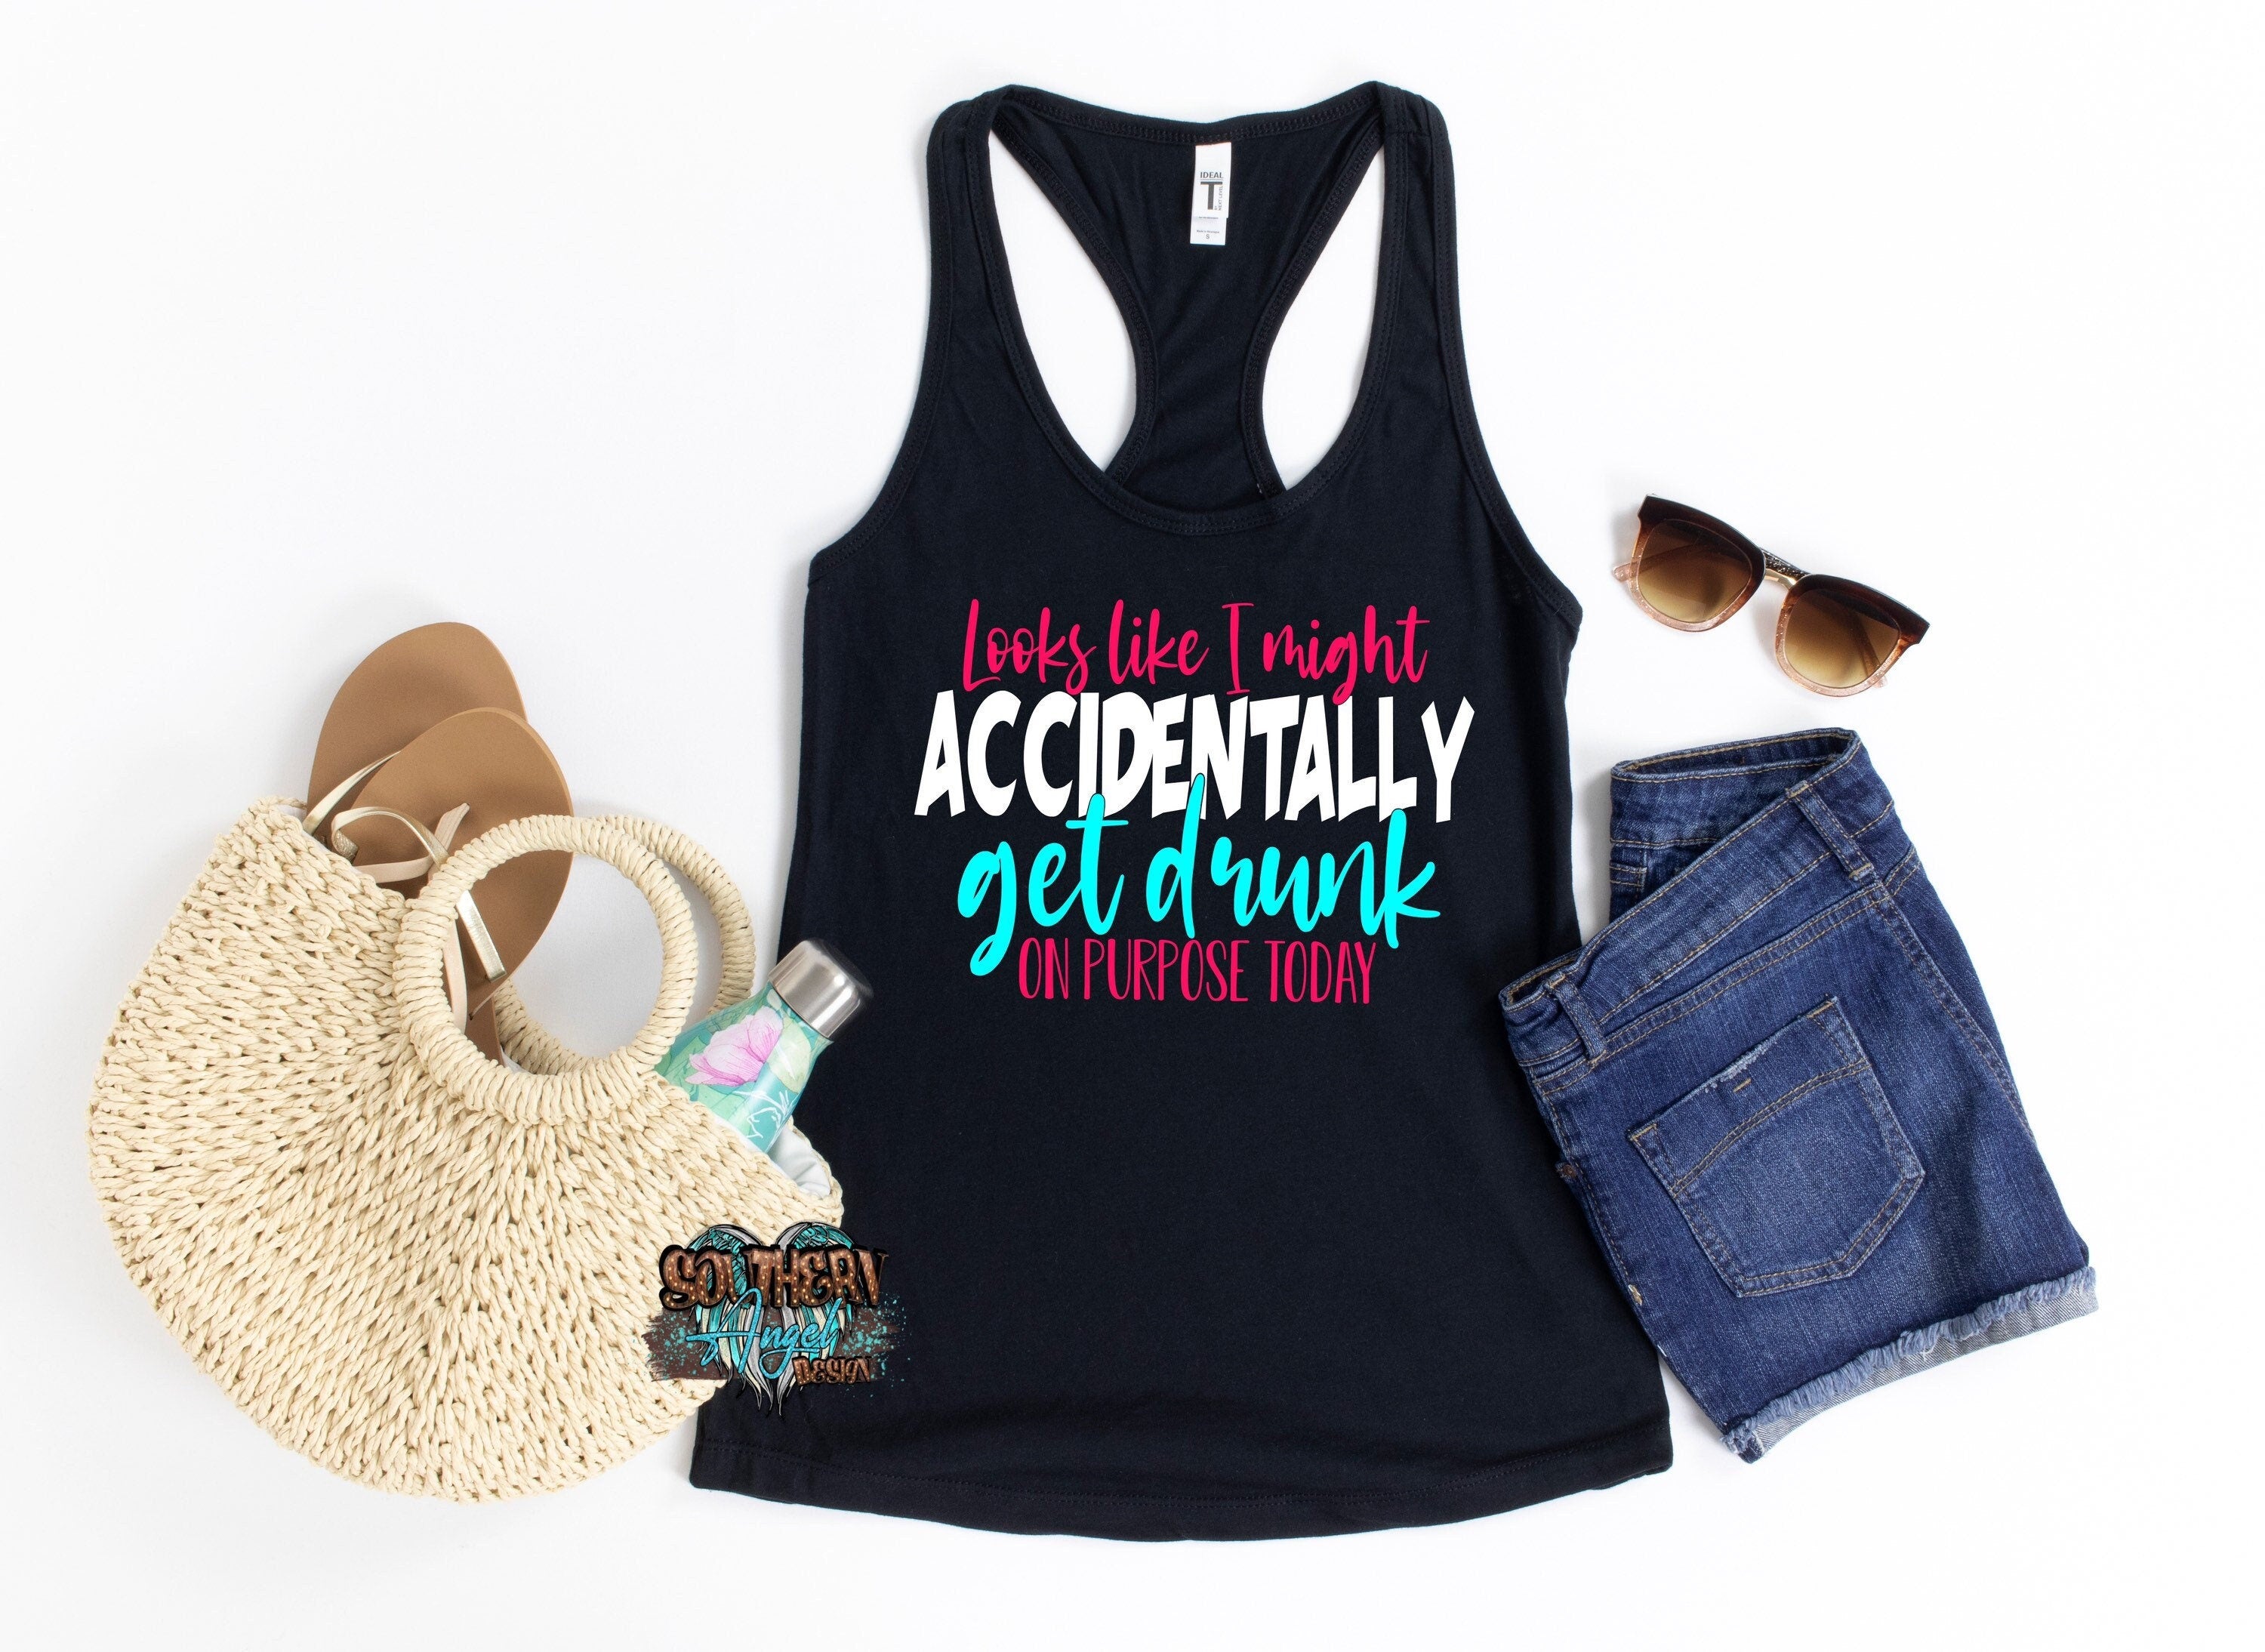 Looks like I might accidentally get drunk on purpose today | Day drinkin’ tank | Besties tank | Girls trip | Group shirt | Party tank